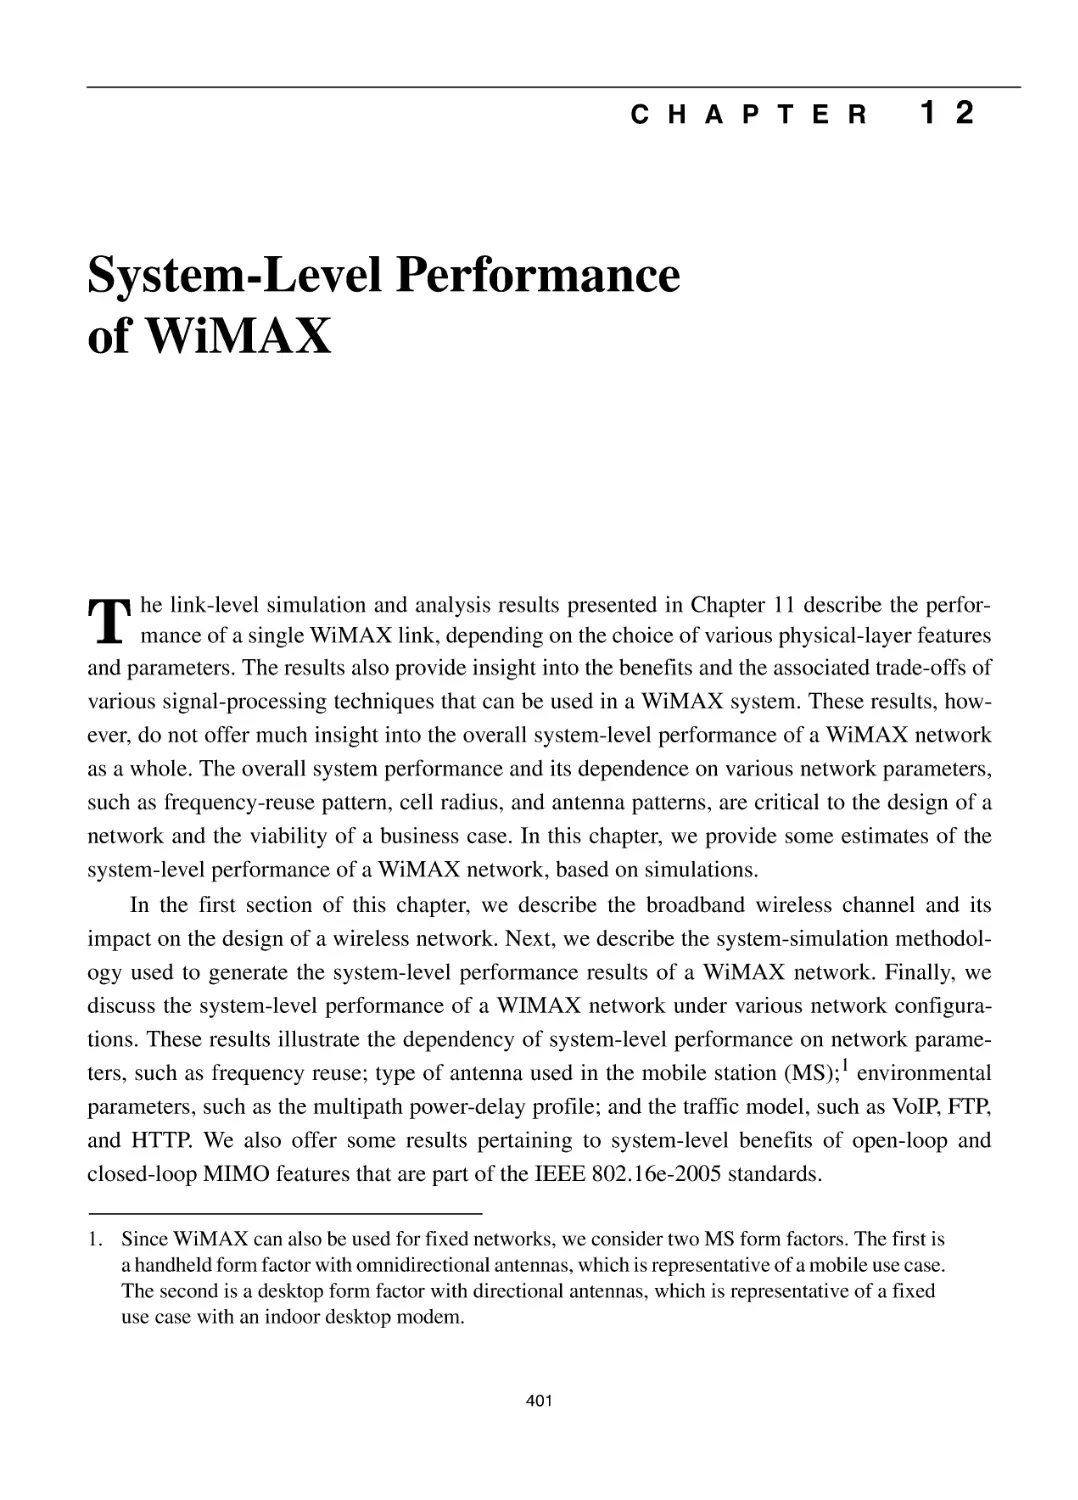 Chapter 12 System-Level Performance of WiMAX